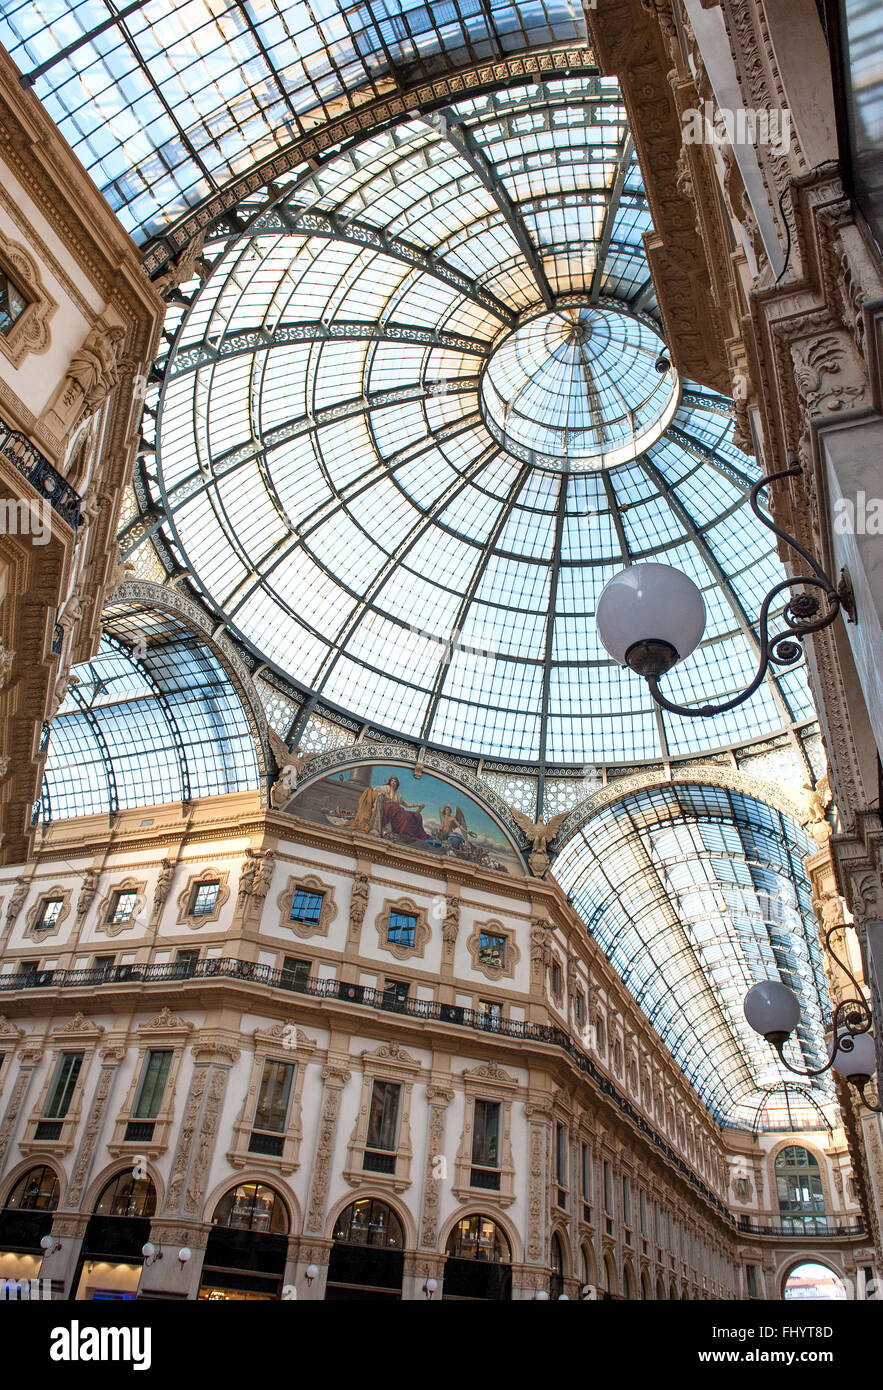 Low angle view of corridors and circular domed ceiling and windows inside the Vittorio Emanuele Milan shopping mall interior Stock Photo